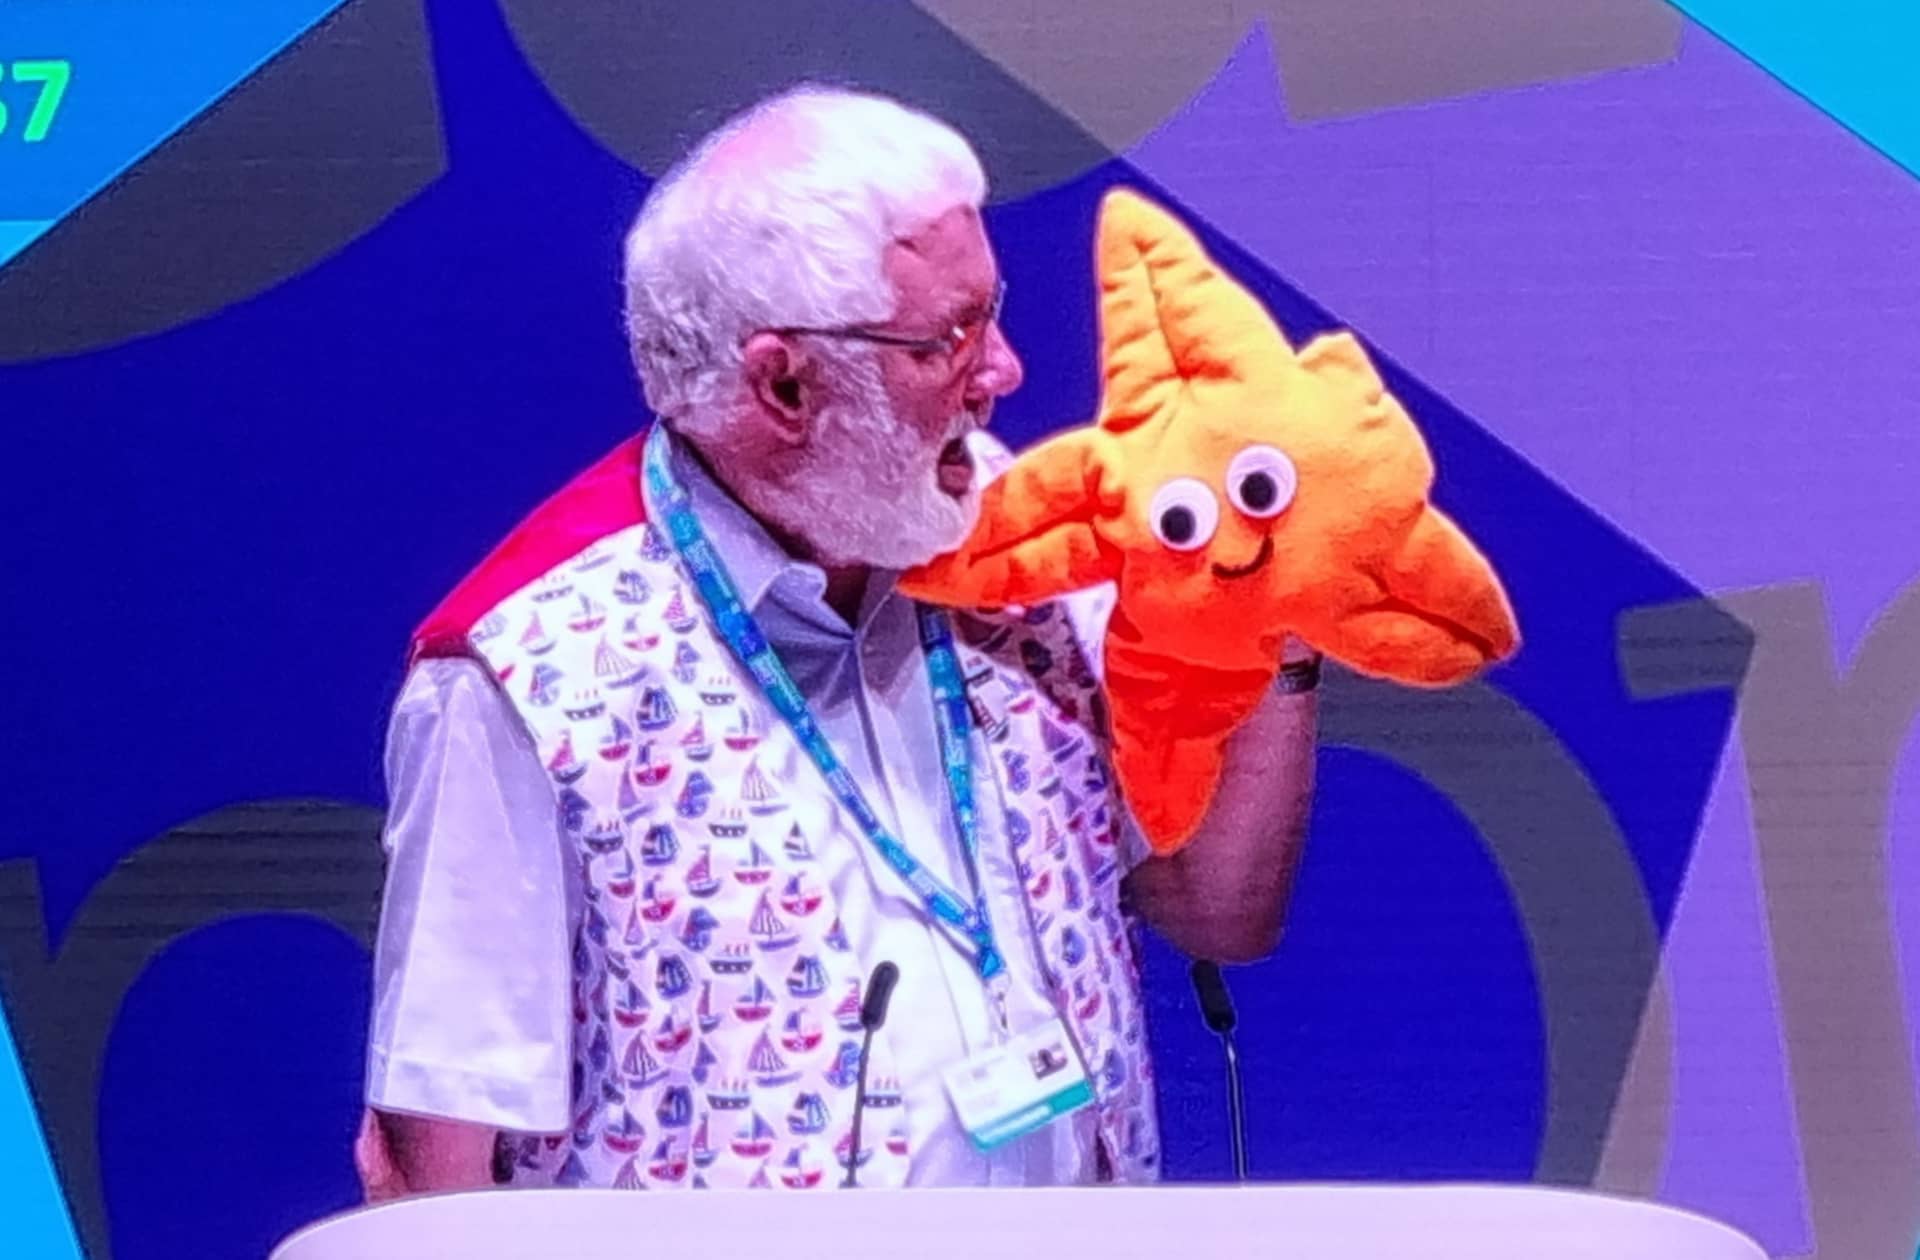 Peter Shreeve giving the Coastal schools speech with a starfish puppet